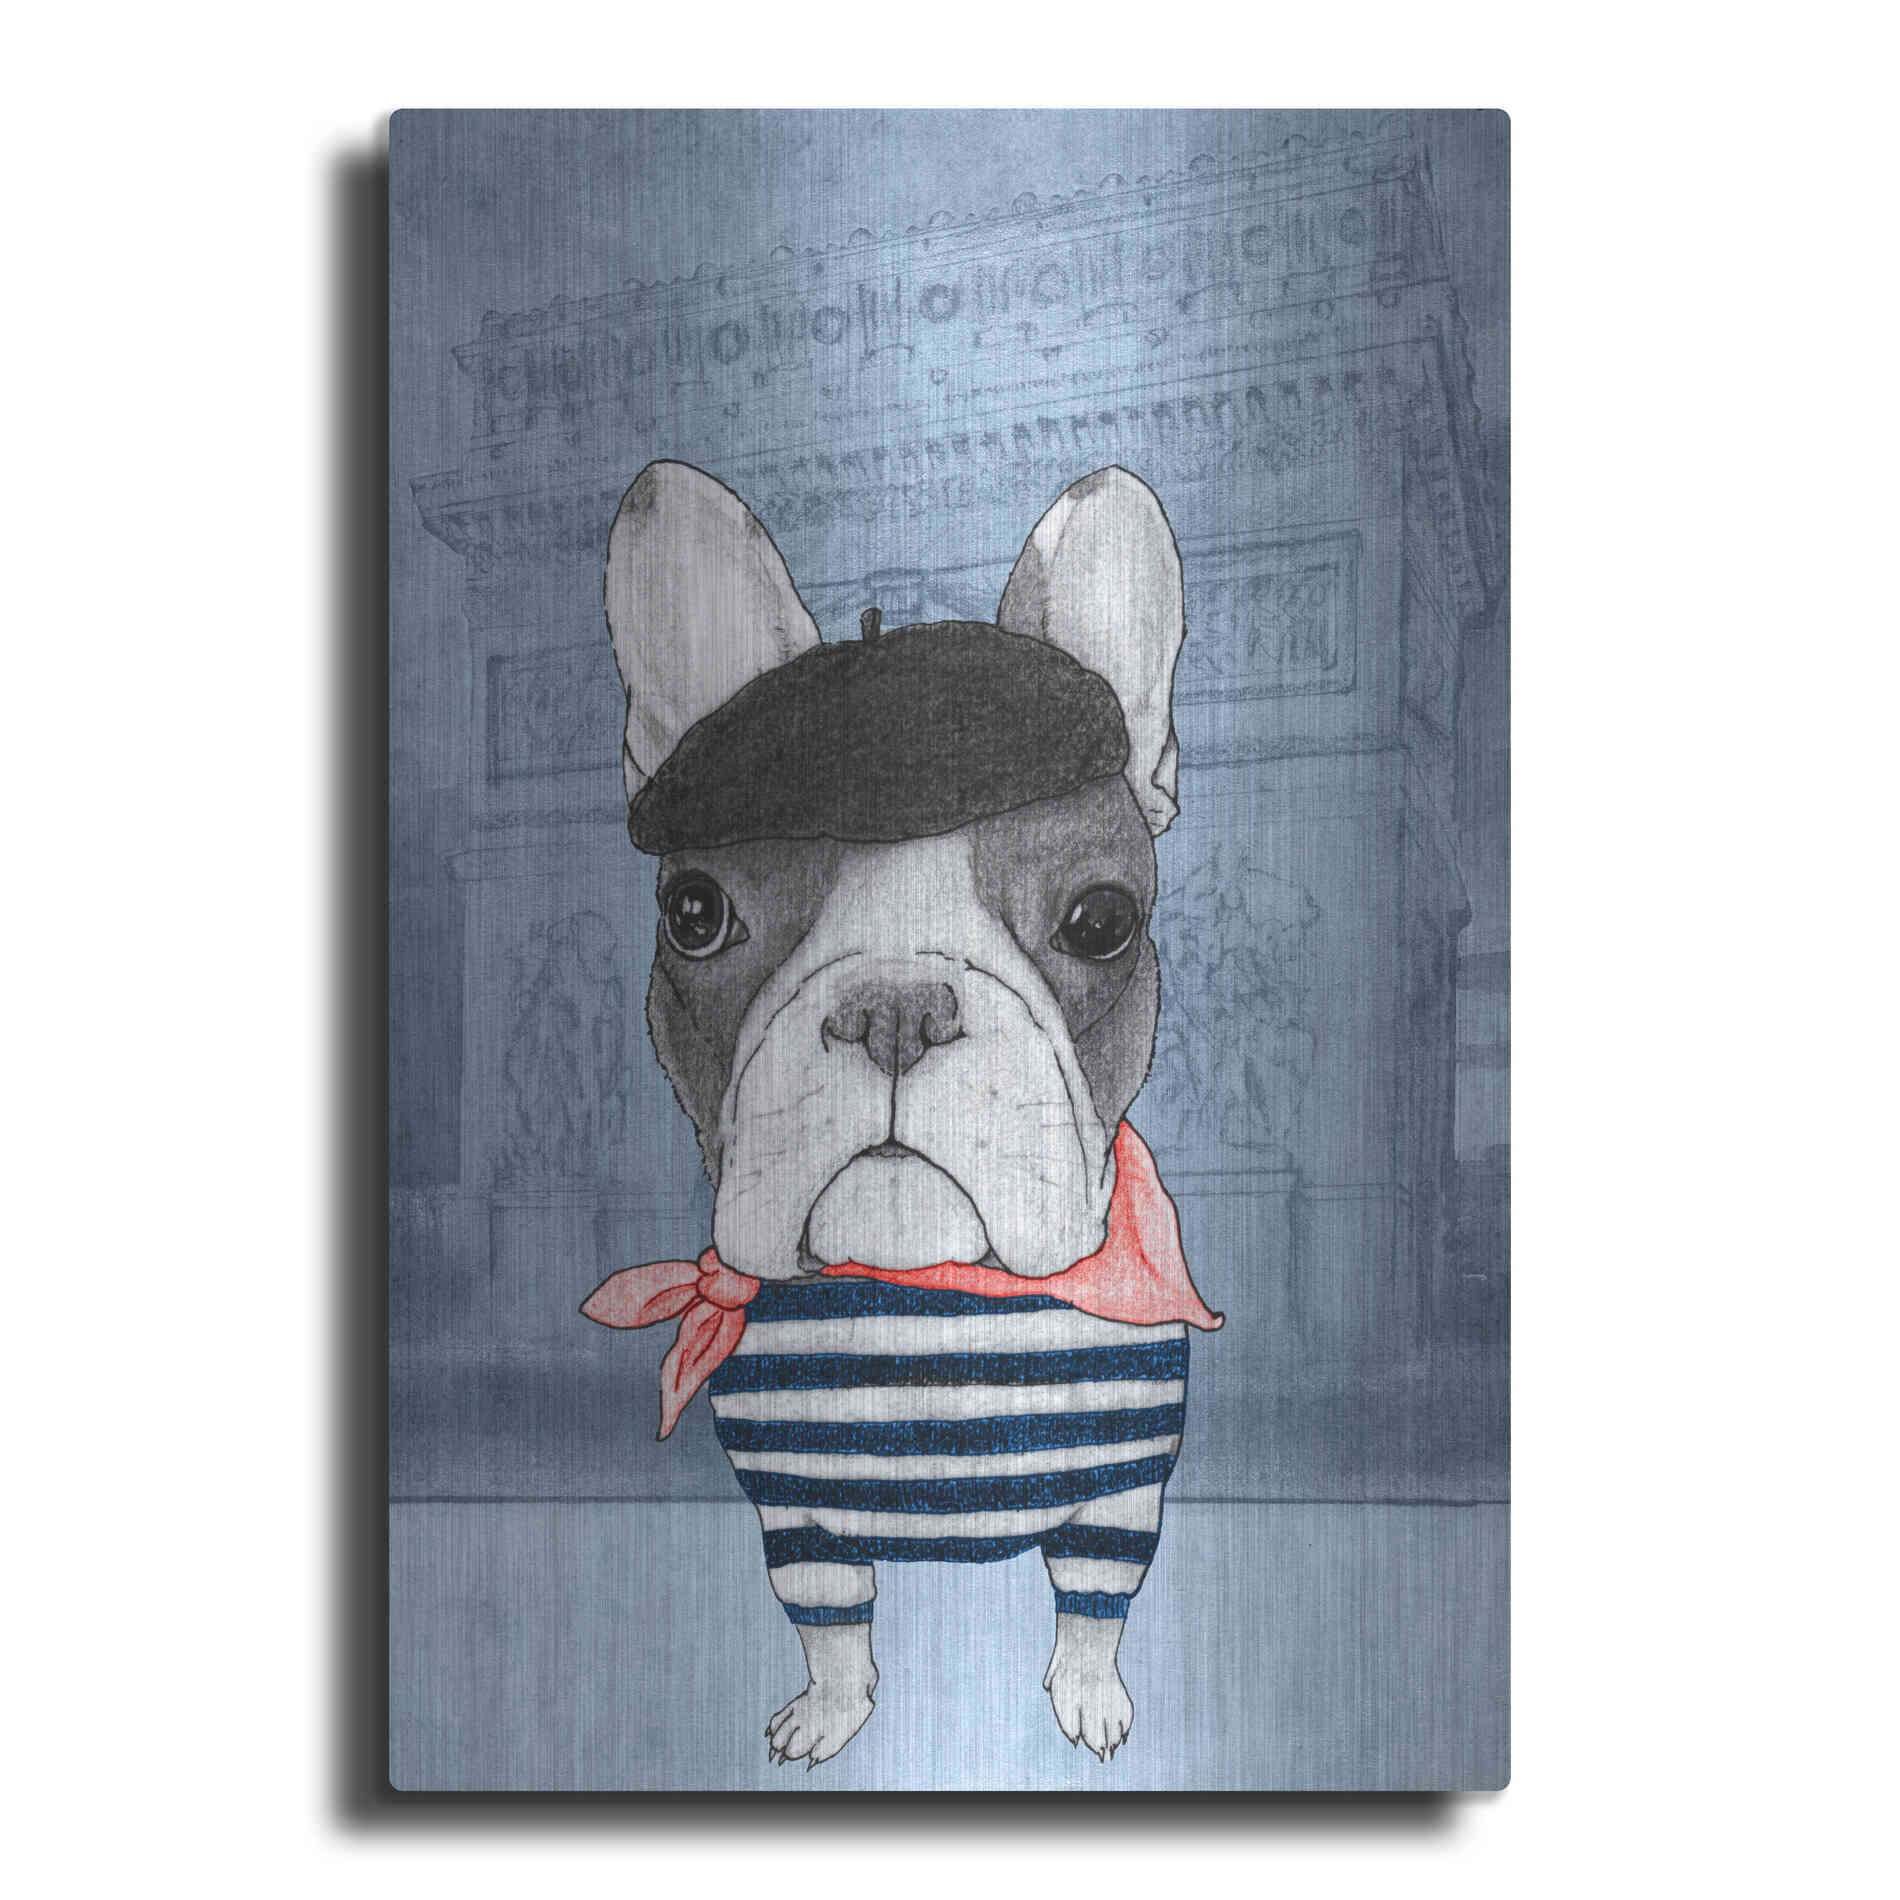 Luxe Metal Art 'French Bulldog with Arc de Triomphe' by Barruf Metal Wall Art